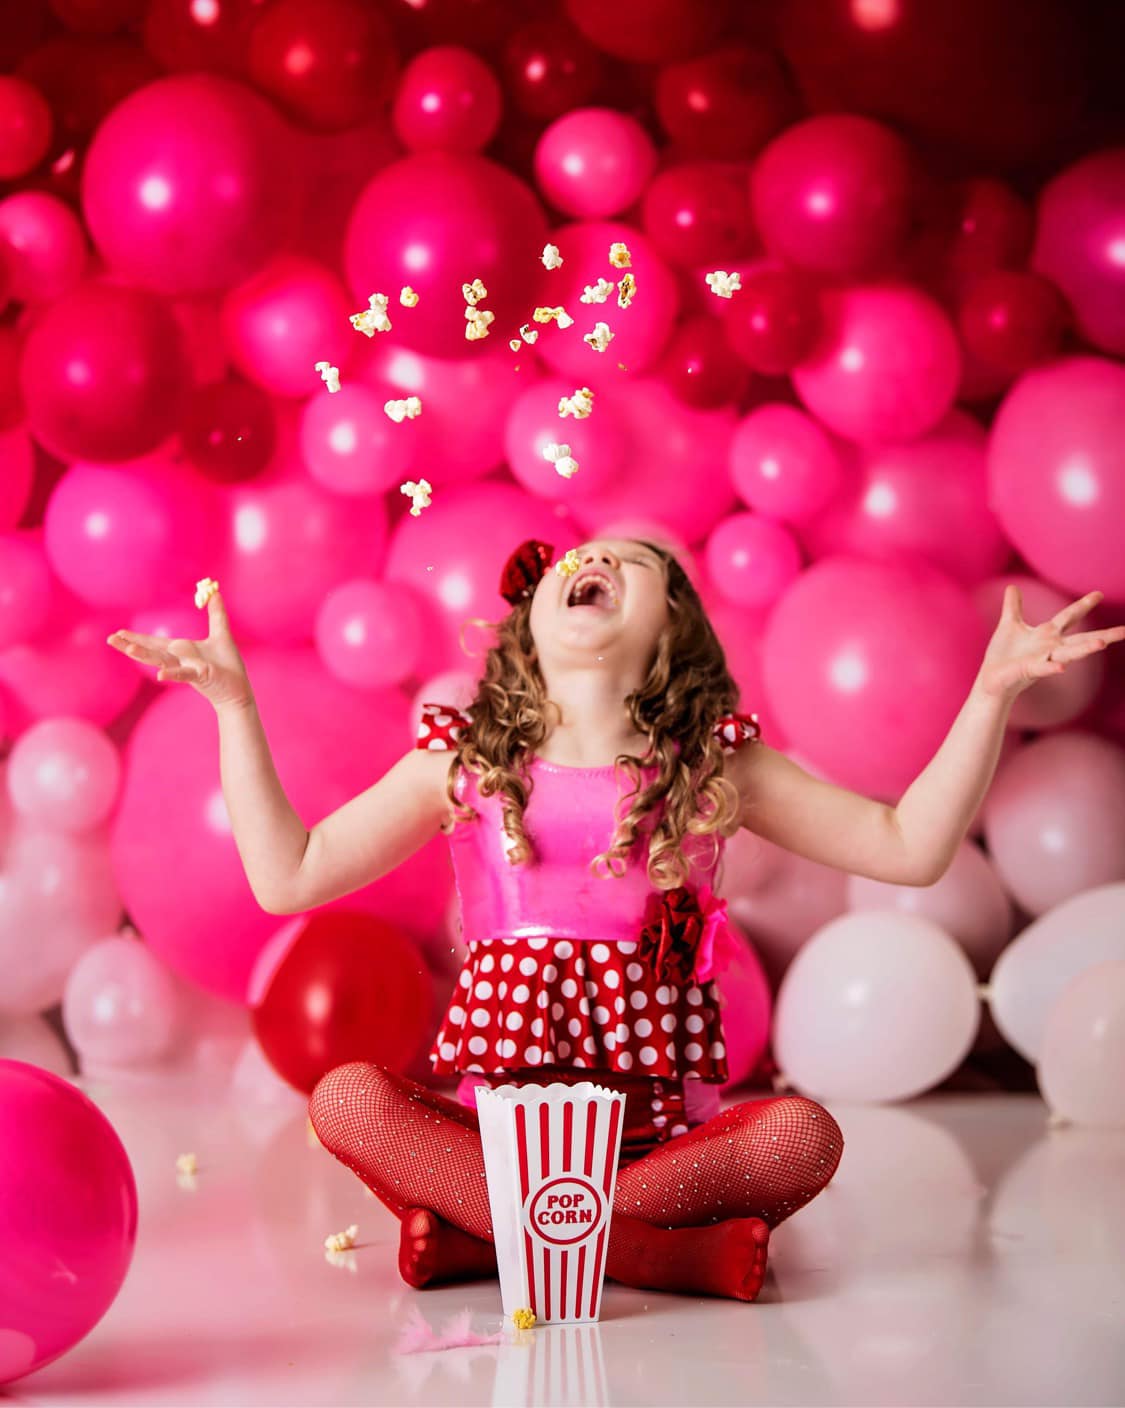 Kate Red Balloon Wall Valentine's Day Birthday Cake Smash Party Backdrop for Photography Designed by Mandy Ringe Photography - Kate Backdrop